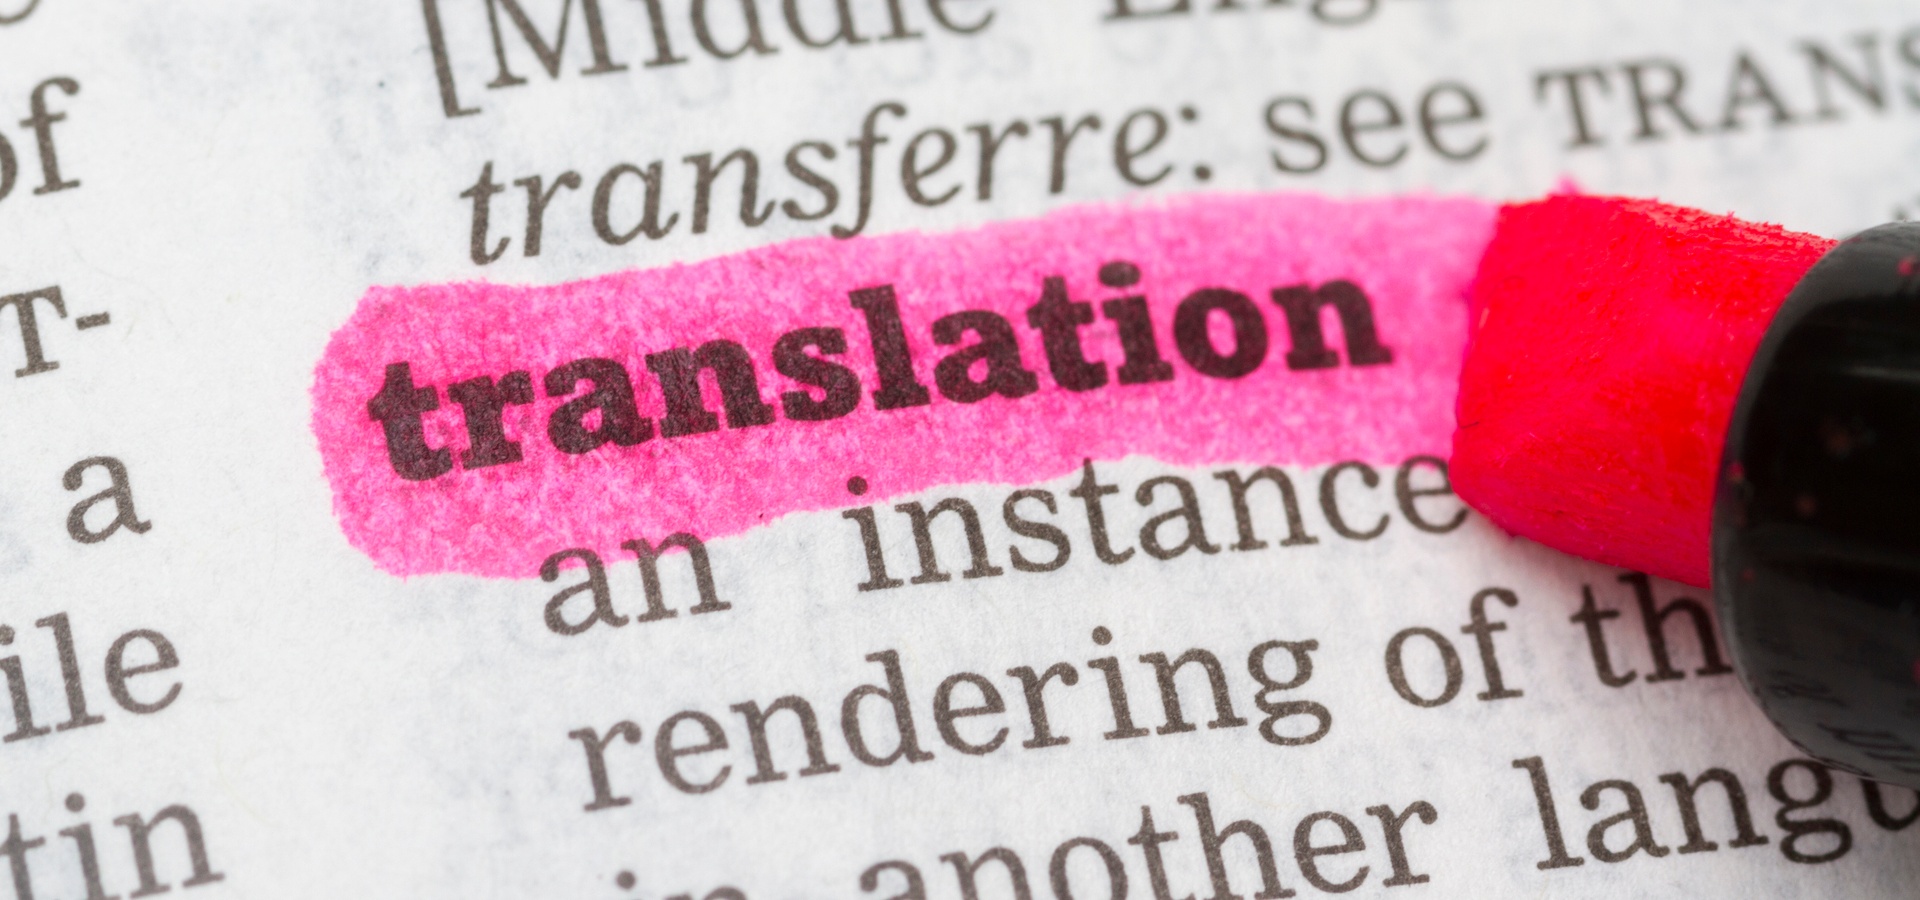 The word "translation" highlighted in pink